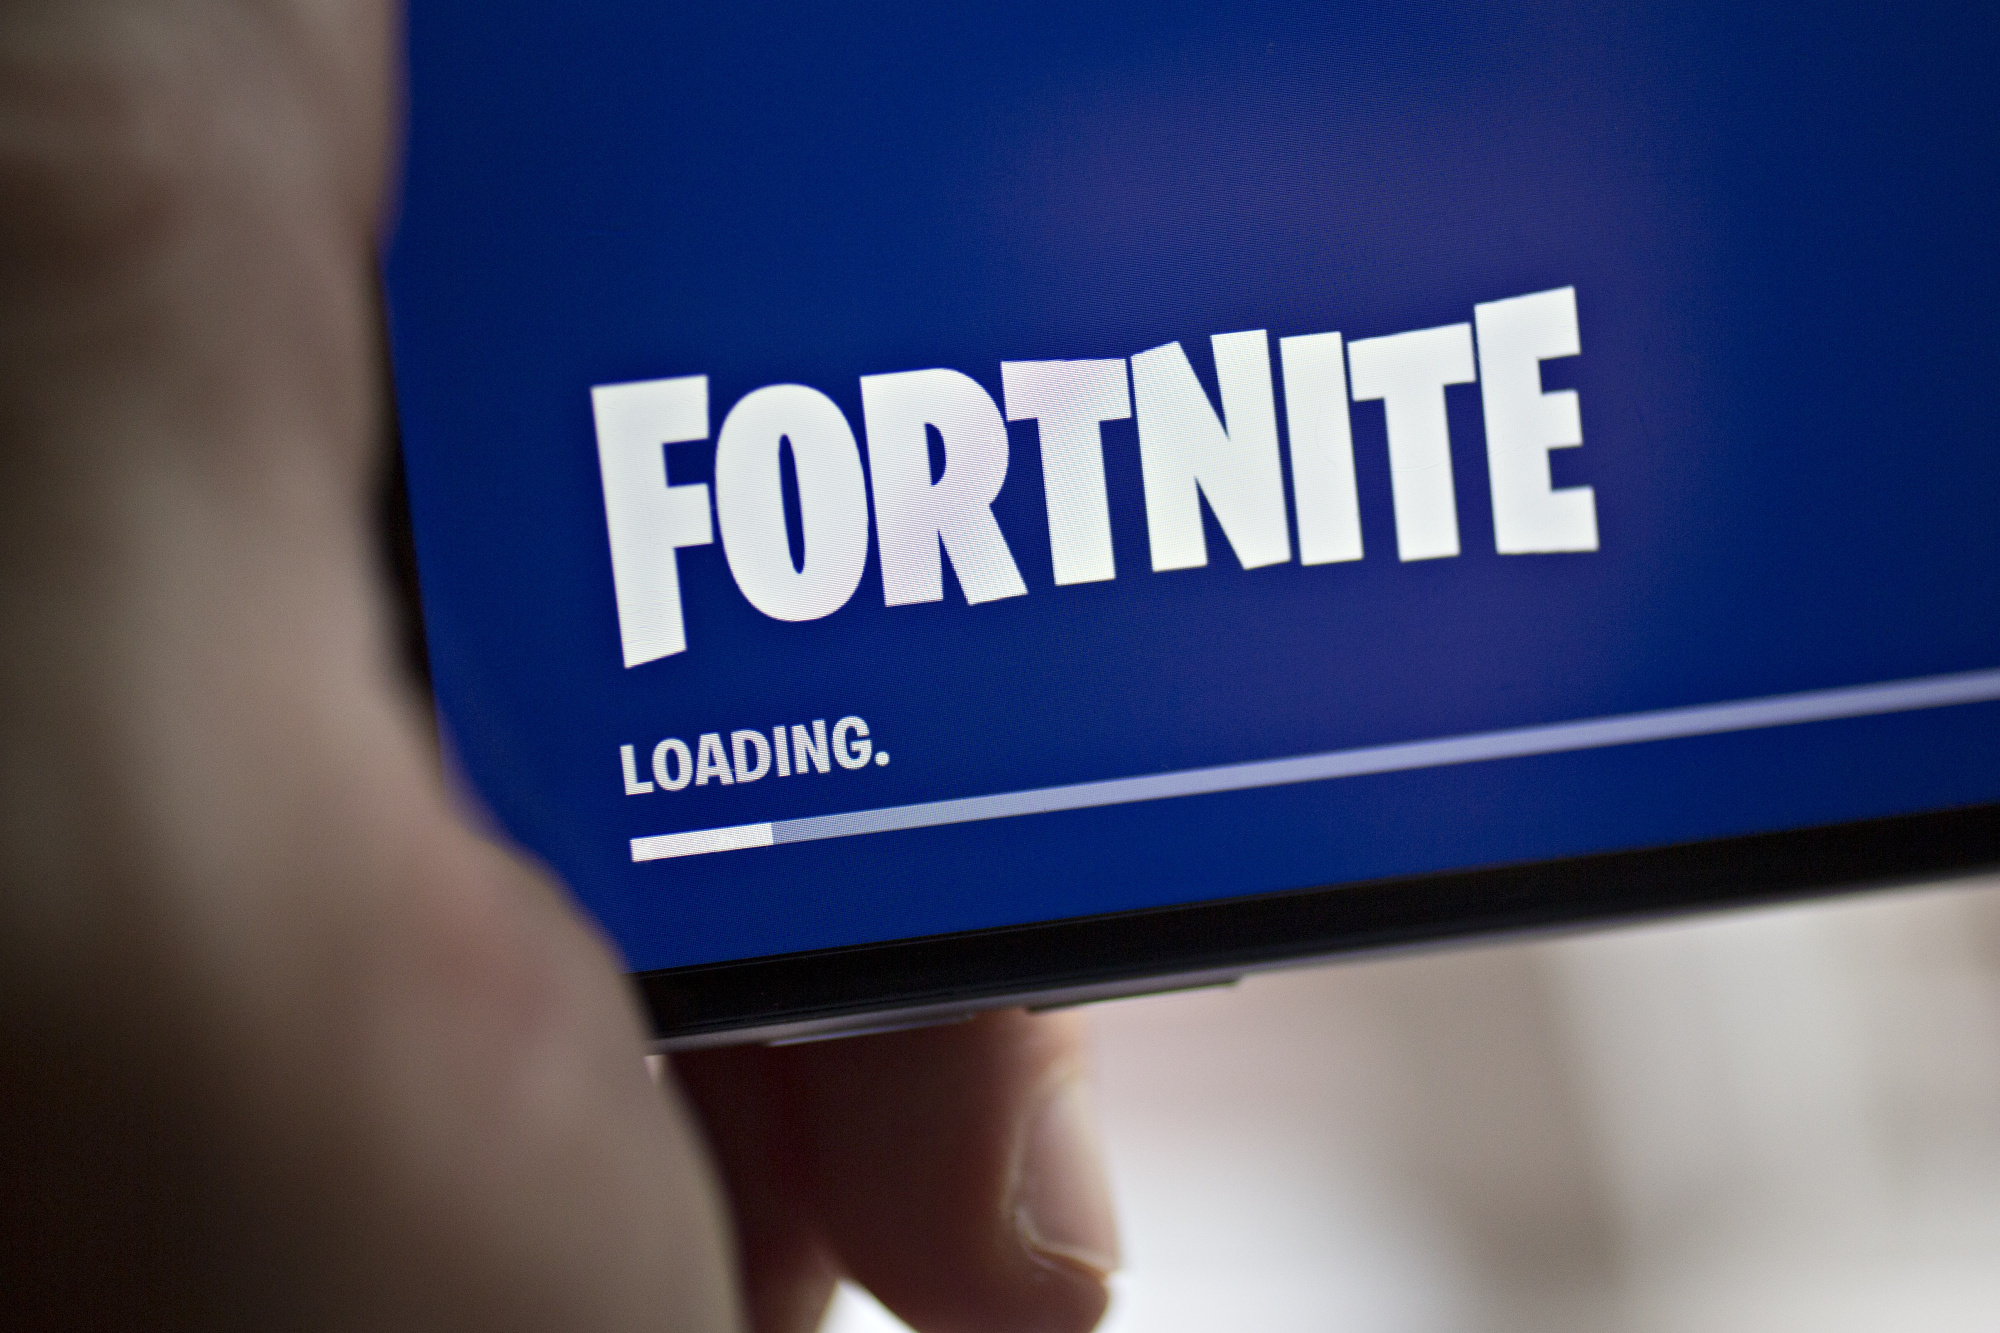 Google offered Epic Games $140 million to keep Fortnite on Play Store